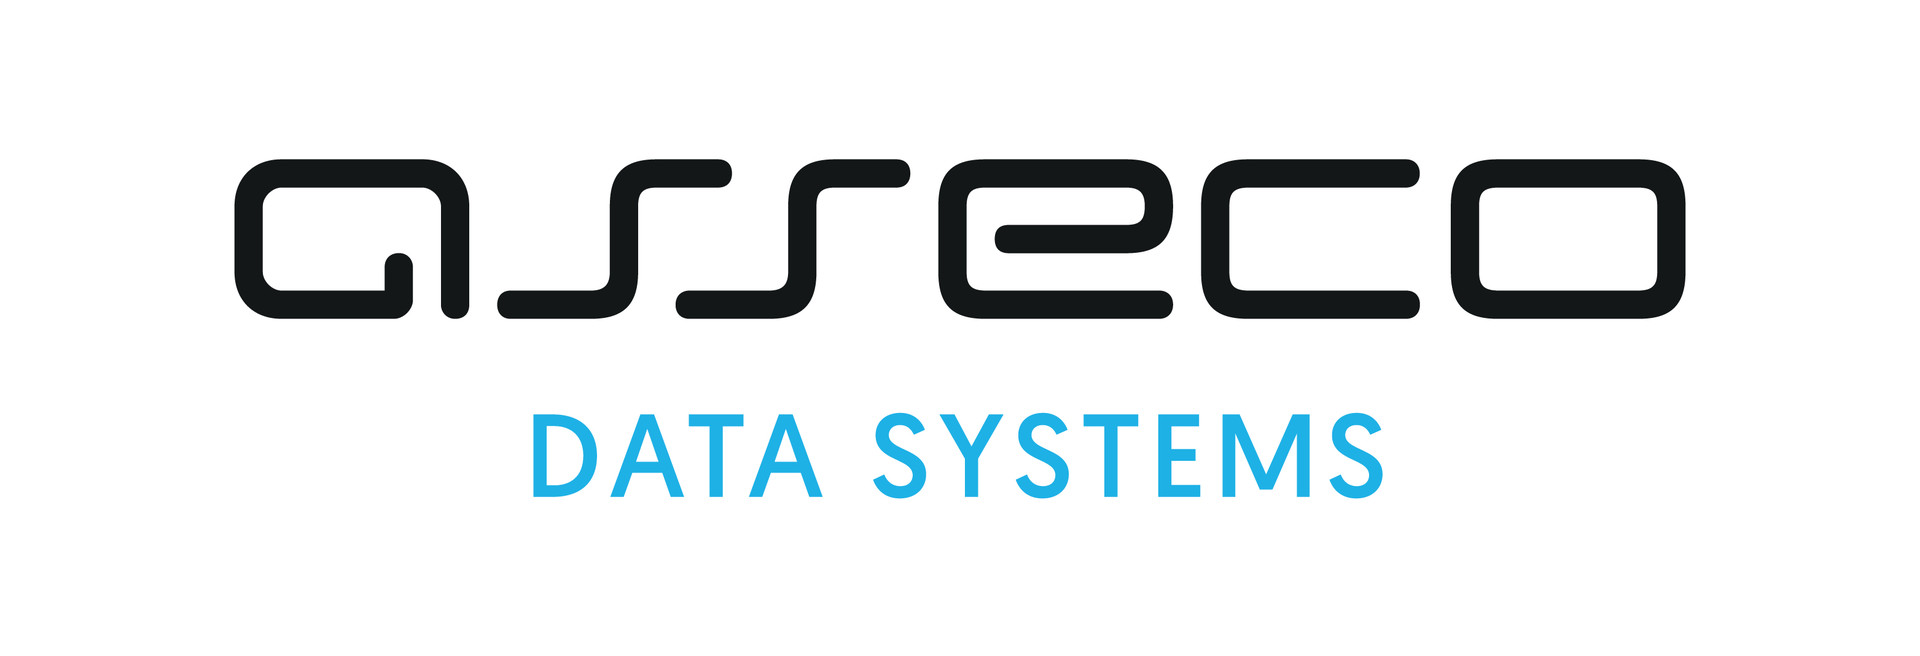 _asseco_data_systems.jpg